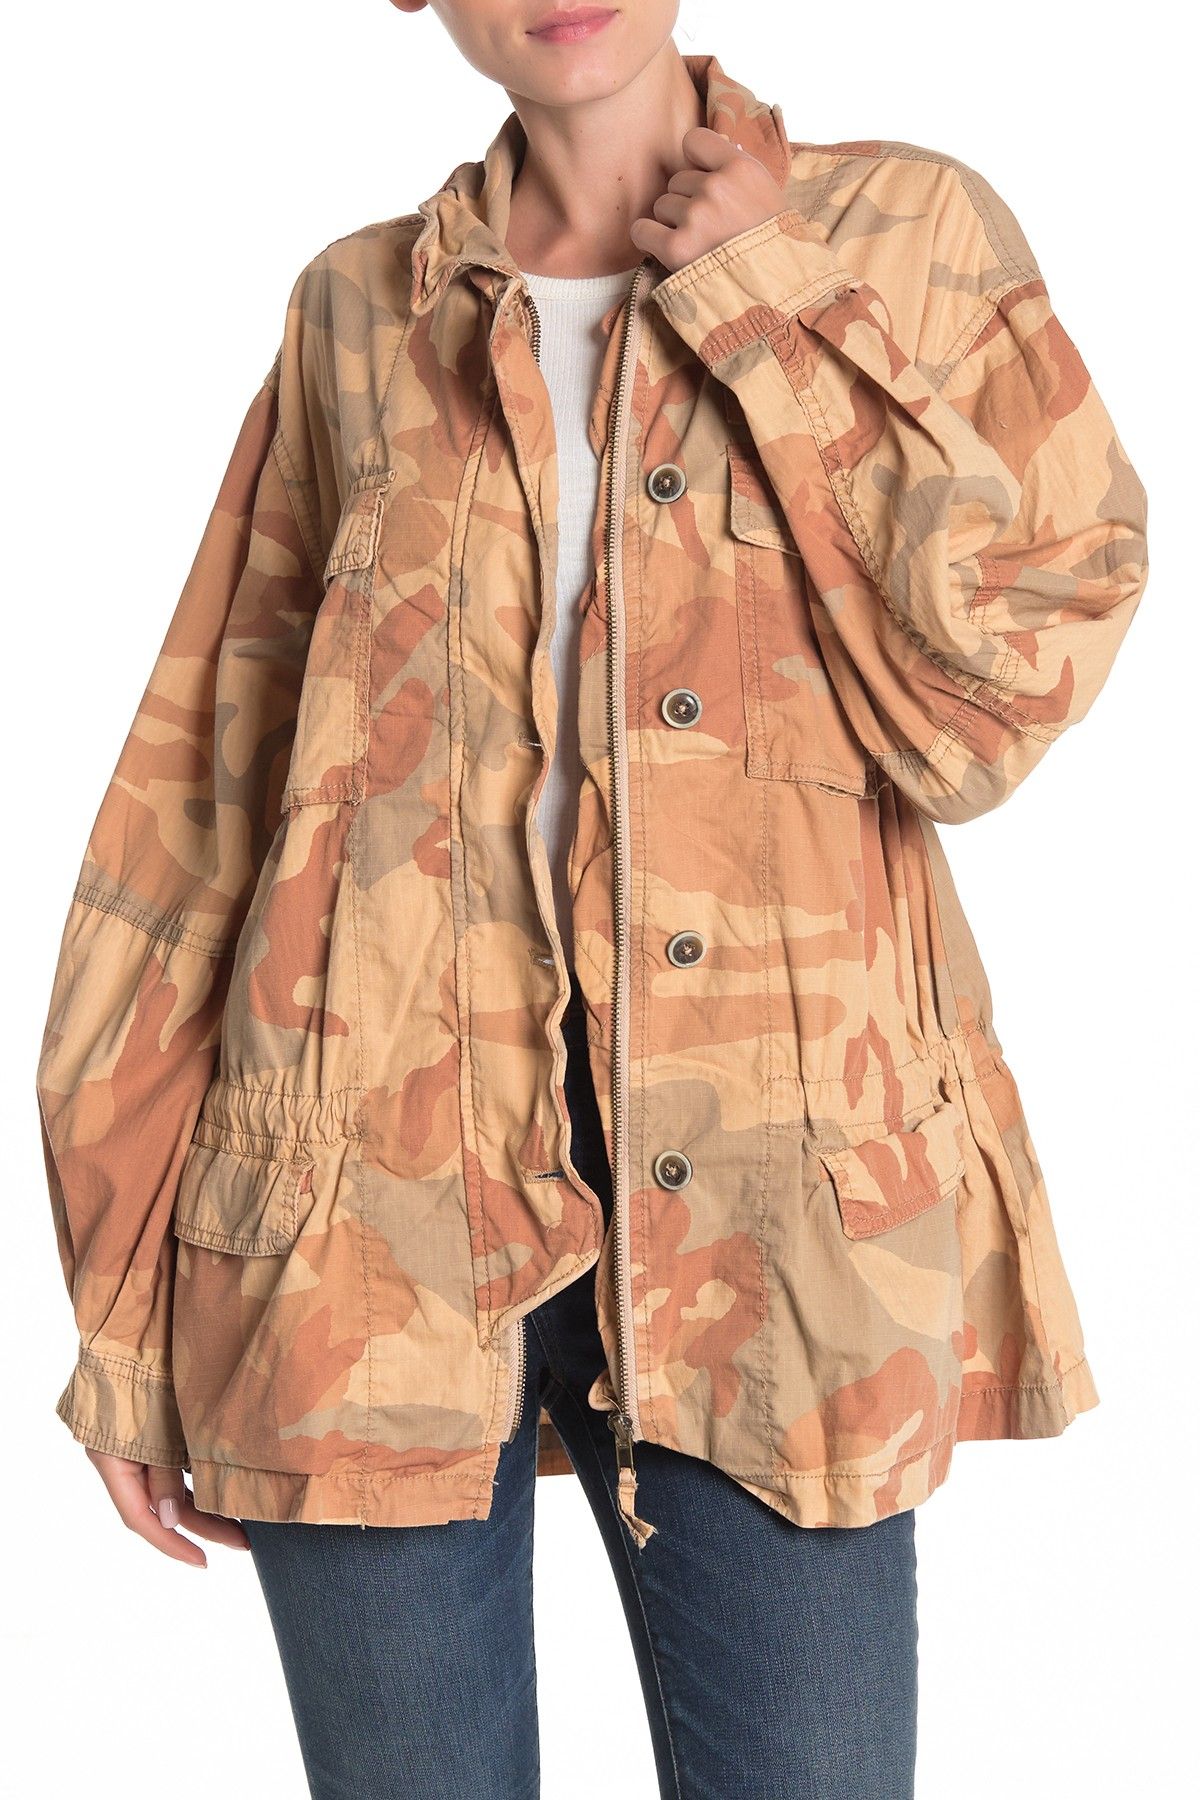 Color: Browns Size Type: Regular Size (Women's): S Type: Jacket Style: Basic Jacket Outer Shell Material: 100% Cotton